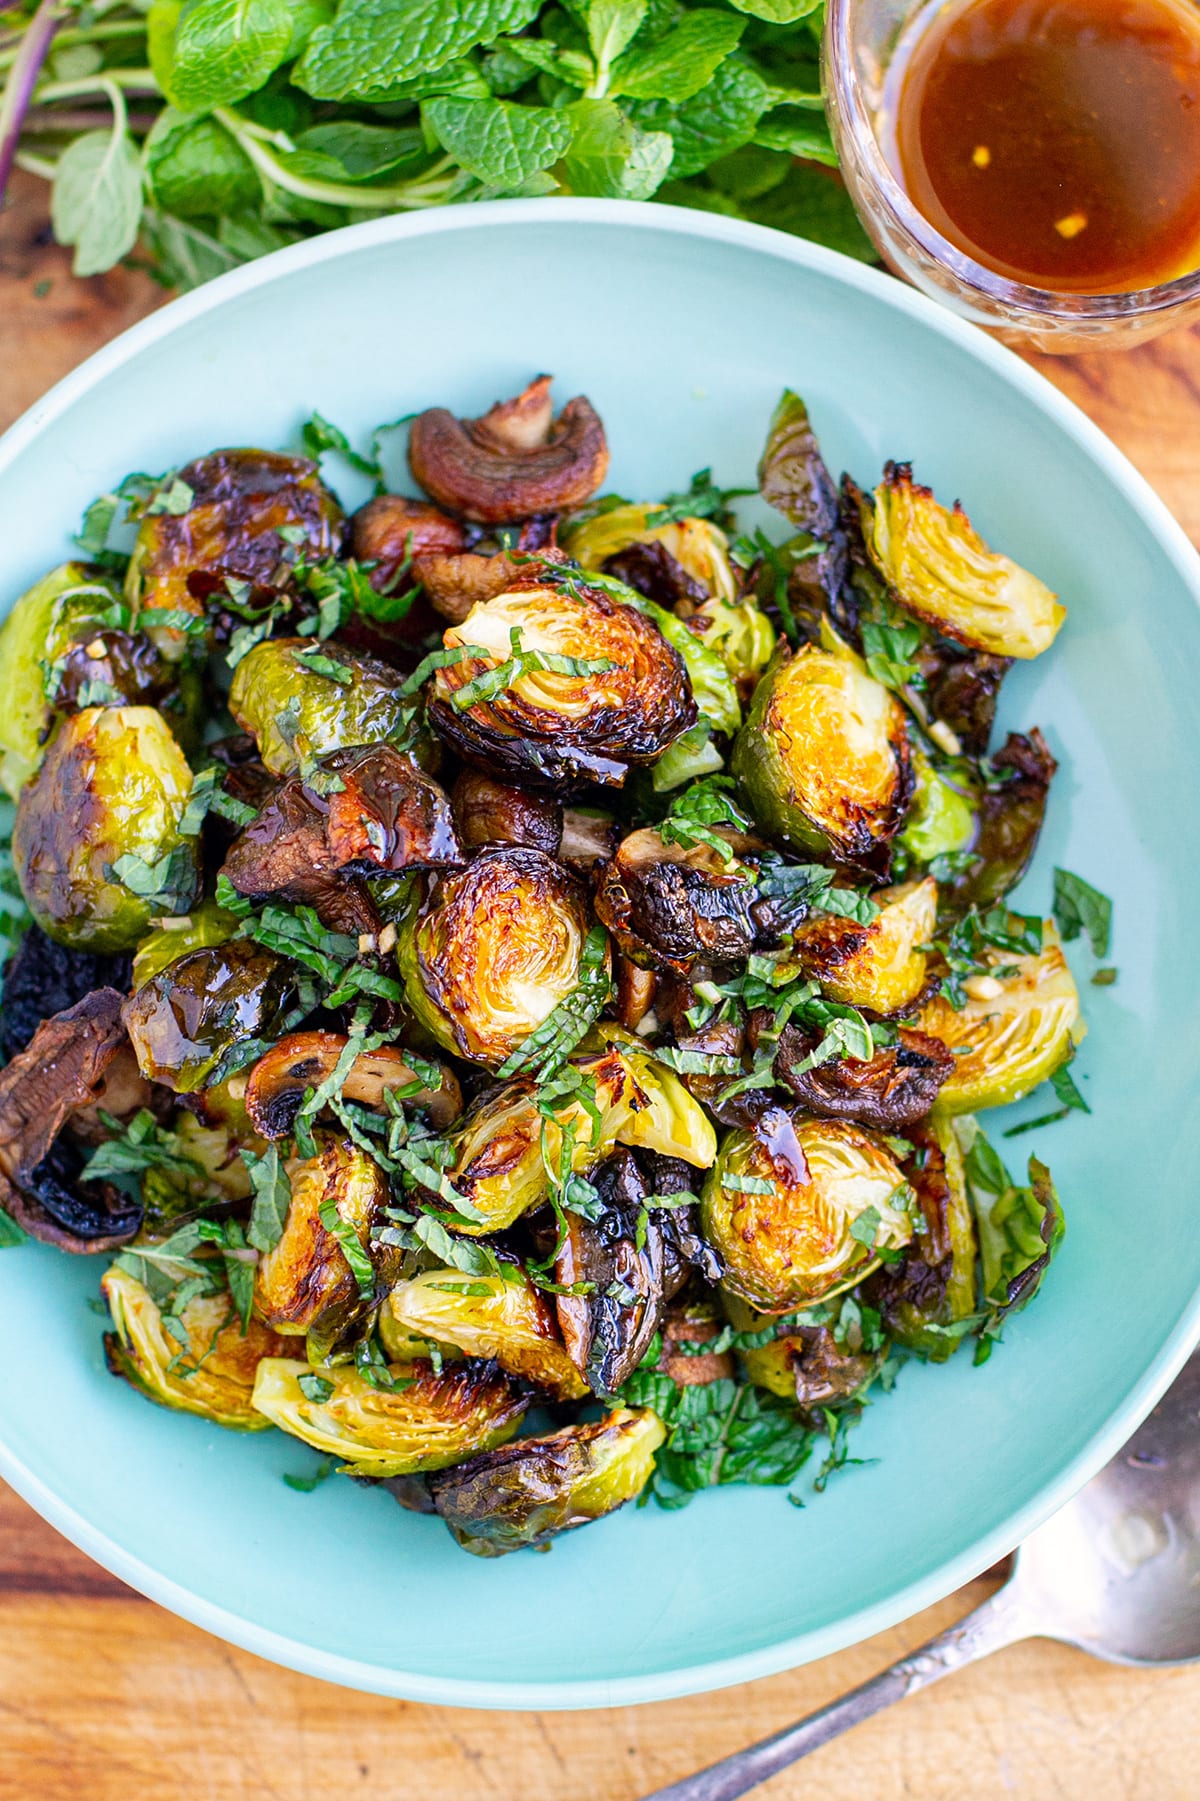 Roasted Brussel sprouts with Honey Balsamic Dressing